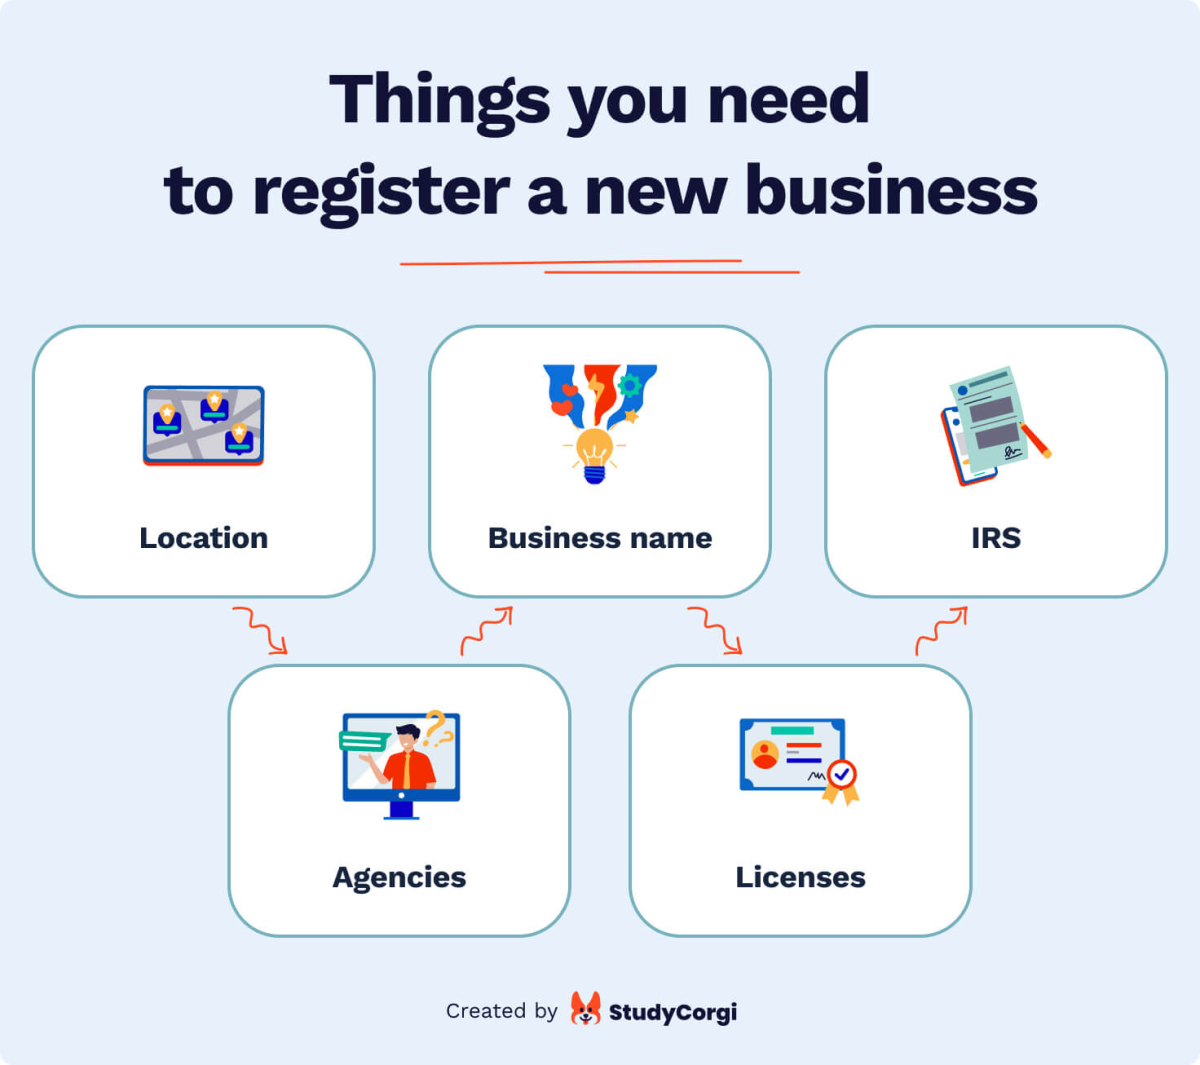 Things young entrepreneurs need to register a new business.